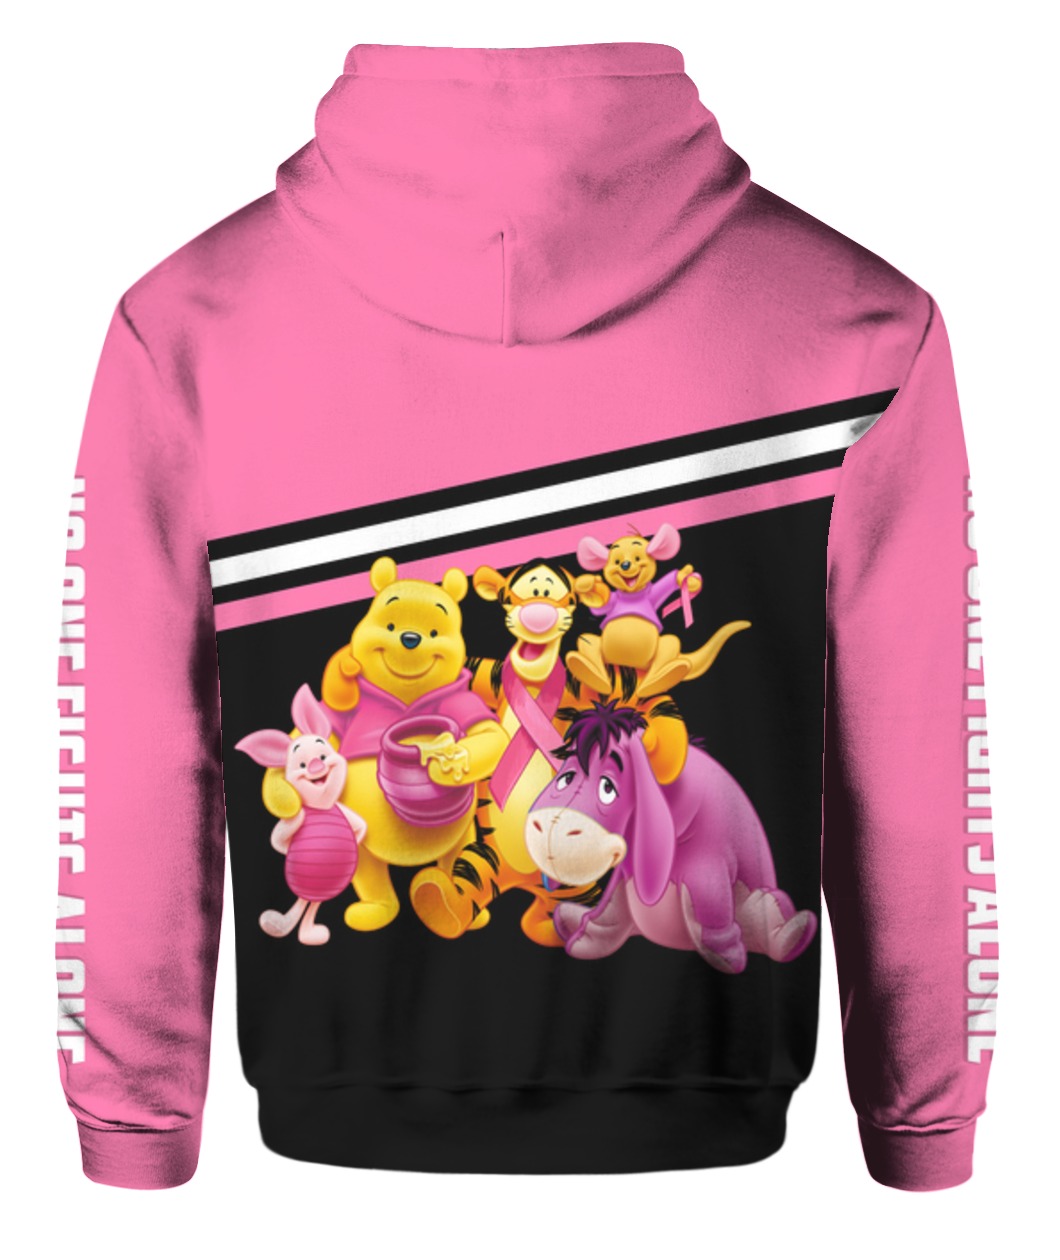 Winnie-the-pooh breast cancer awareness all over printed hoodie - back